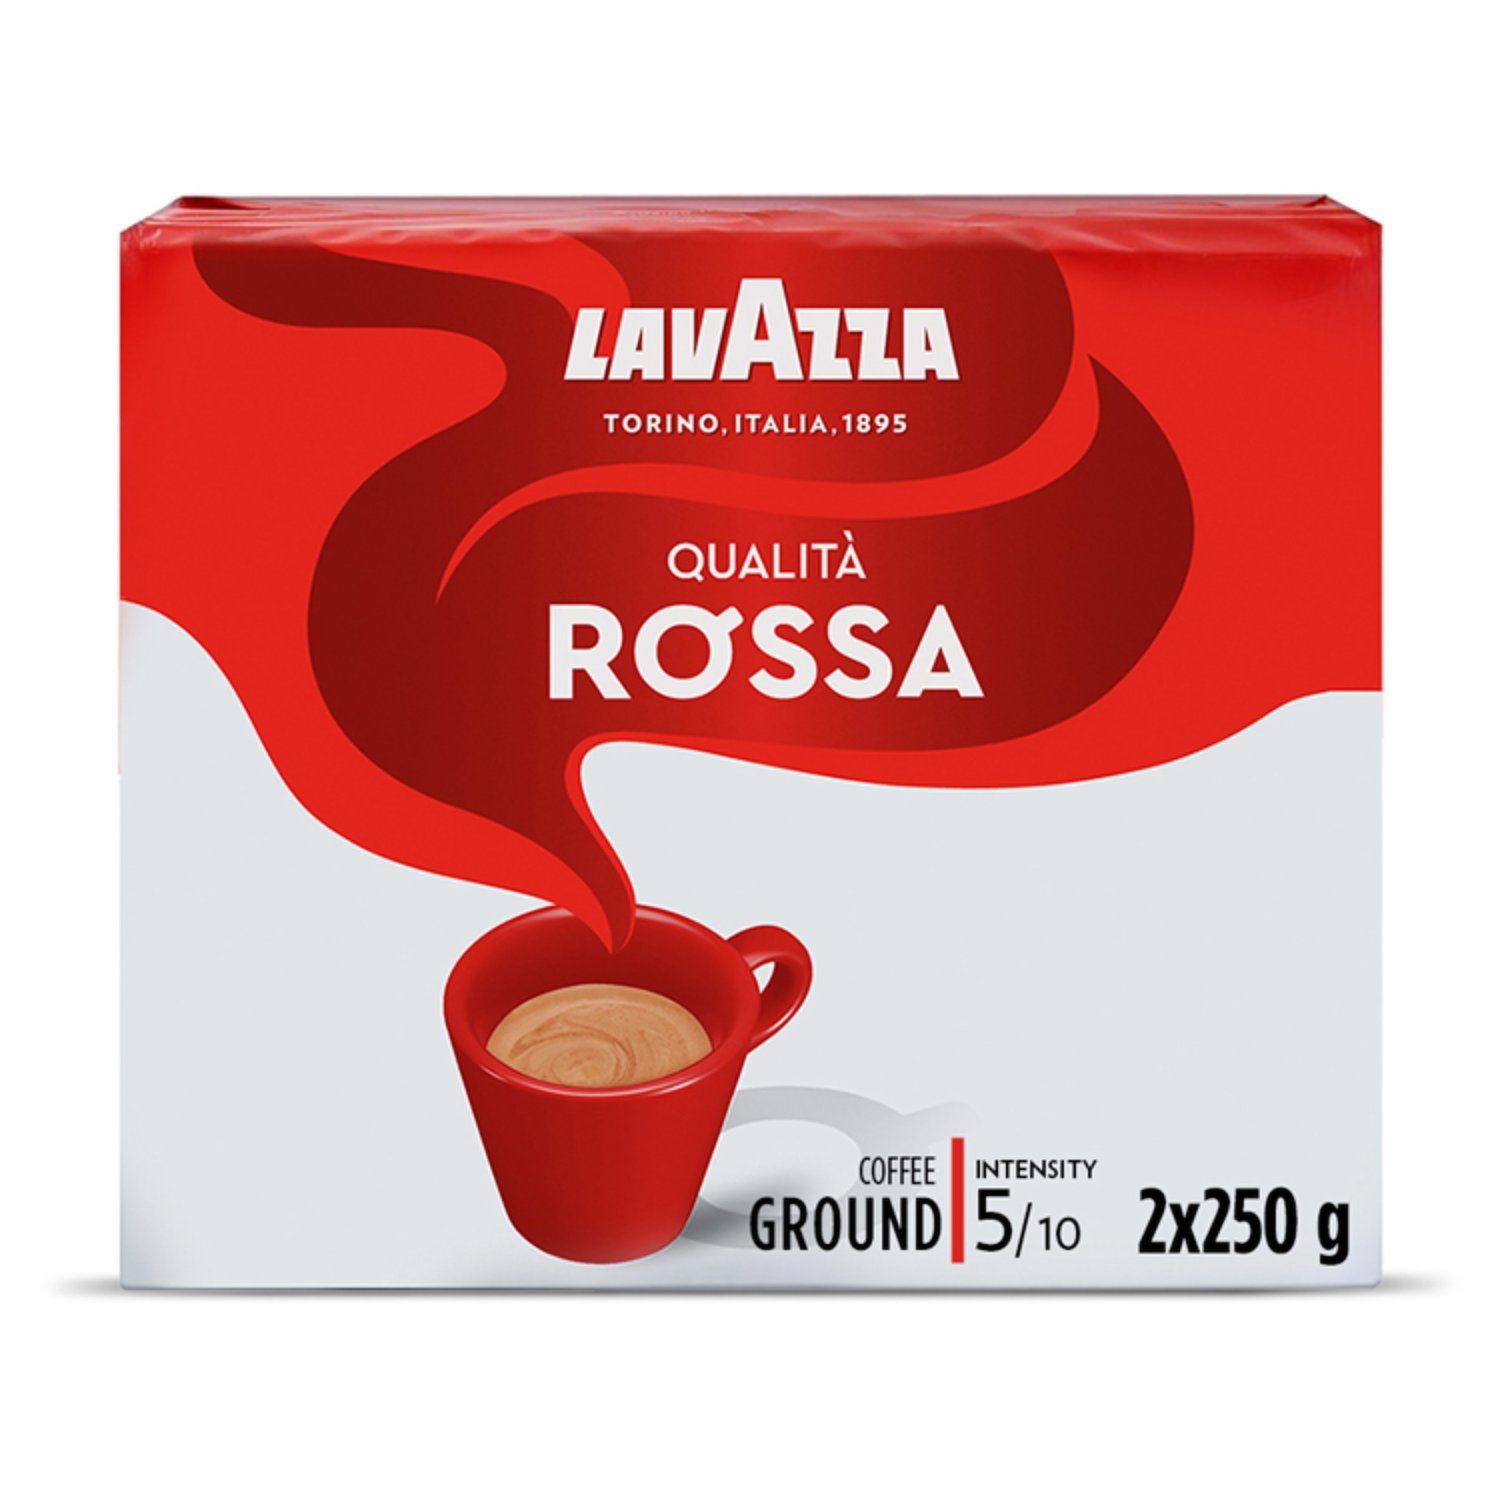 Lavazza Qualita Rossa Ground Coffee For All Coffee Makers 4 x 500g 2Kg New